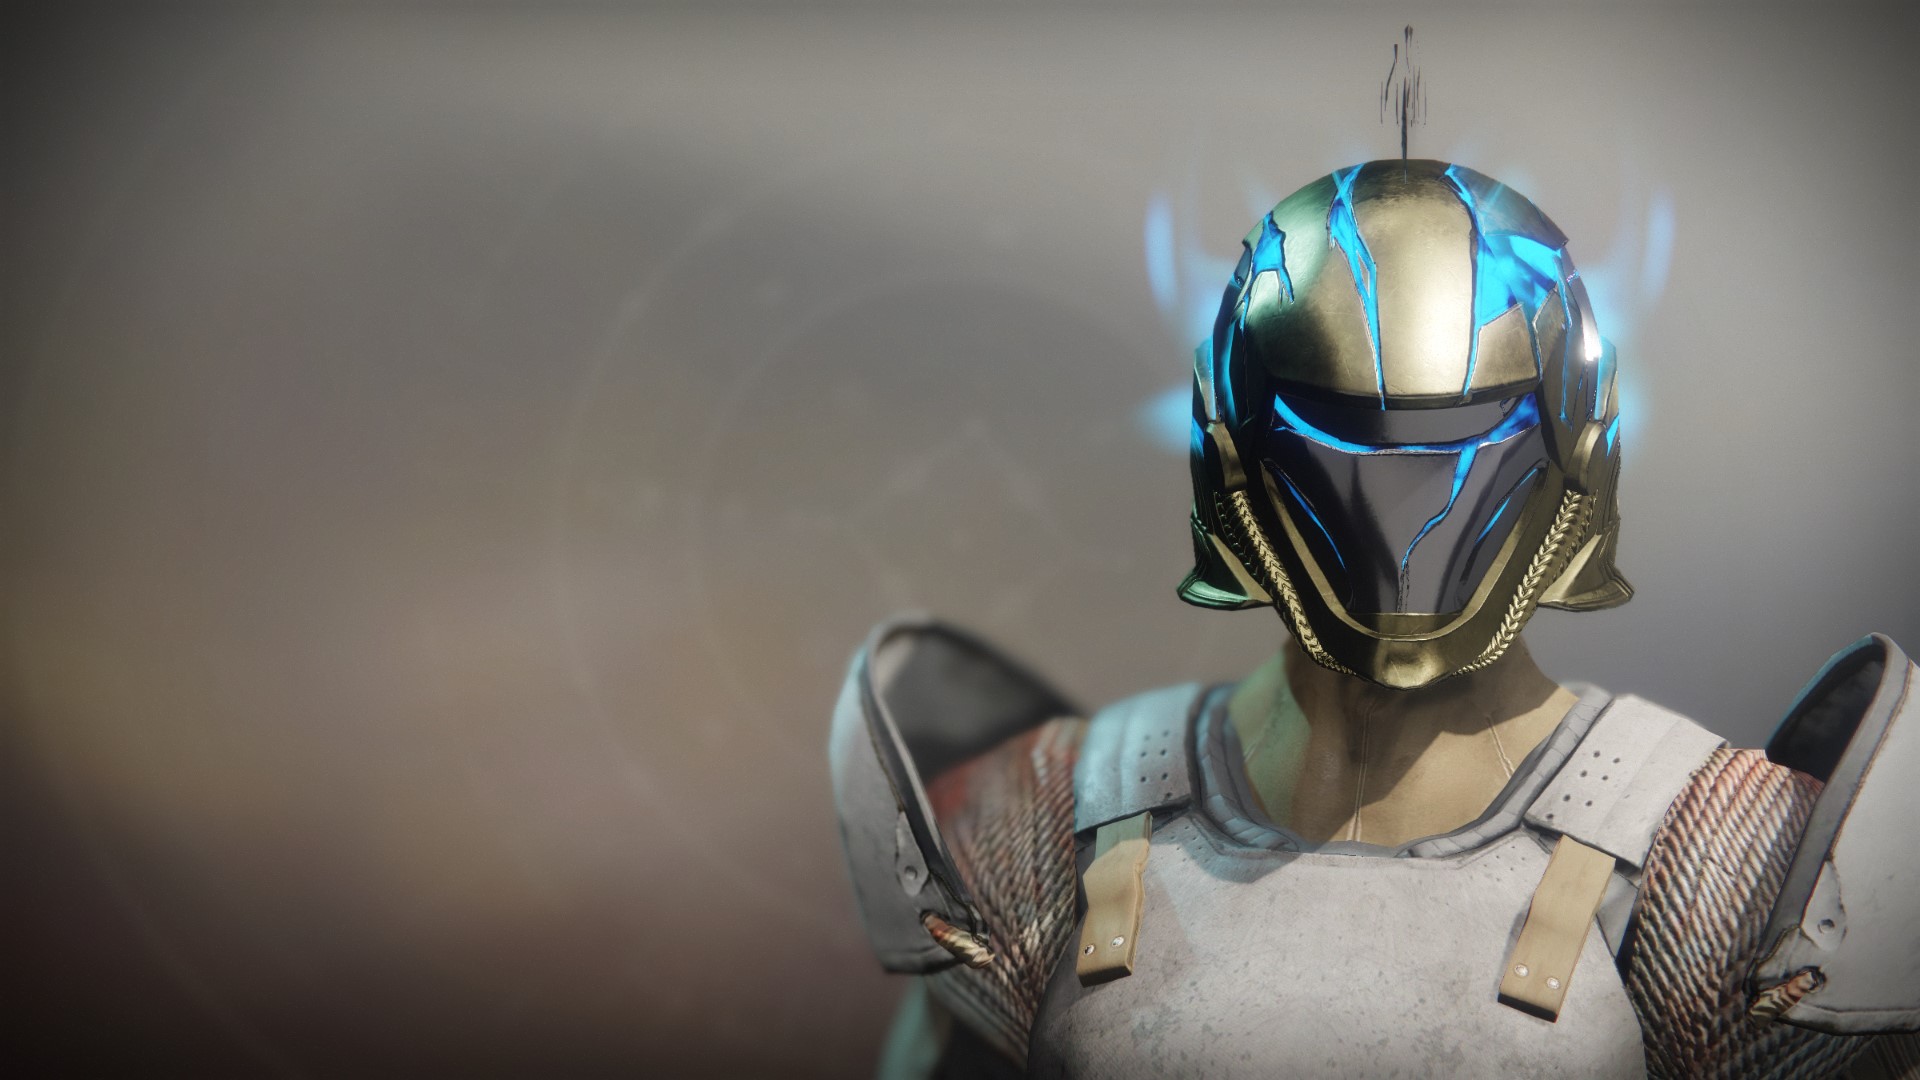 An in-game render of the Solstice Helm (Magnificent).